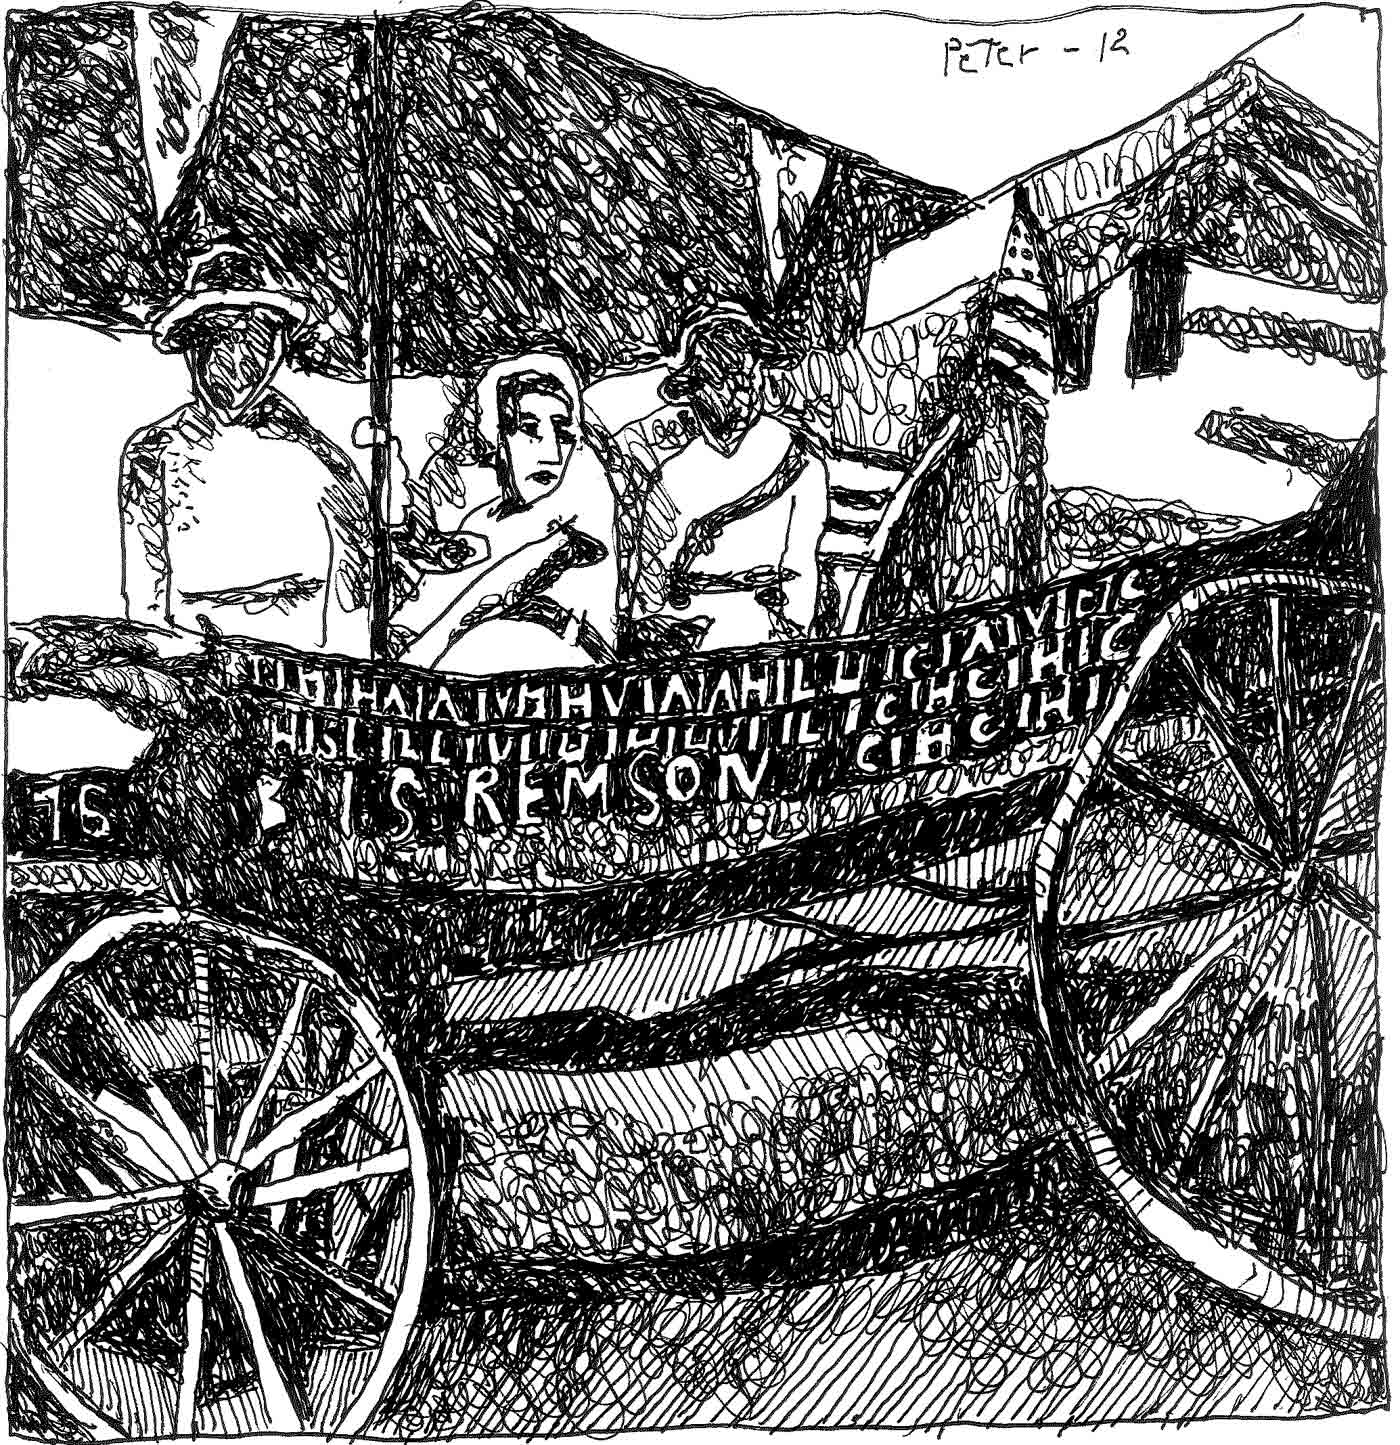 Image of "Spirit of 1776" suffrage wagon by Peter Sinclair